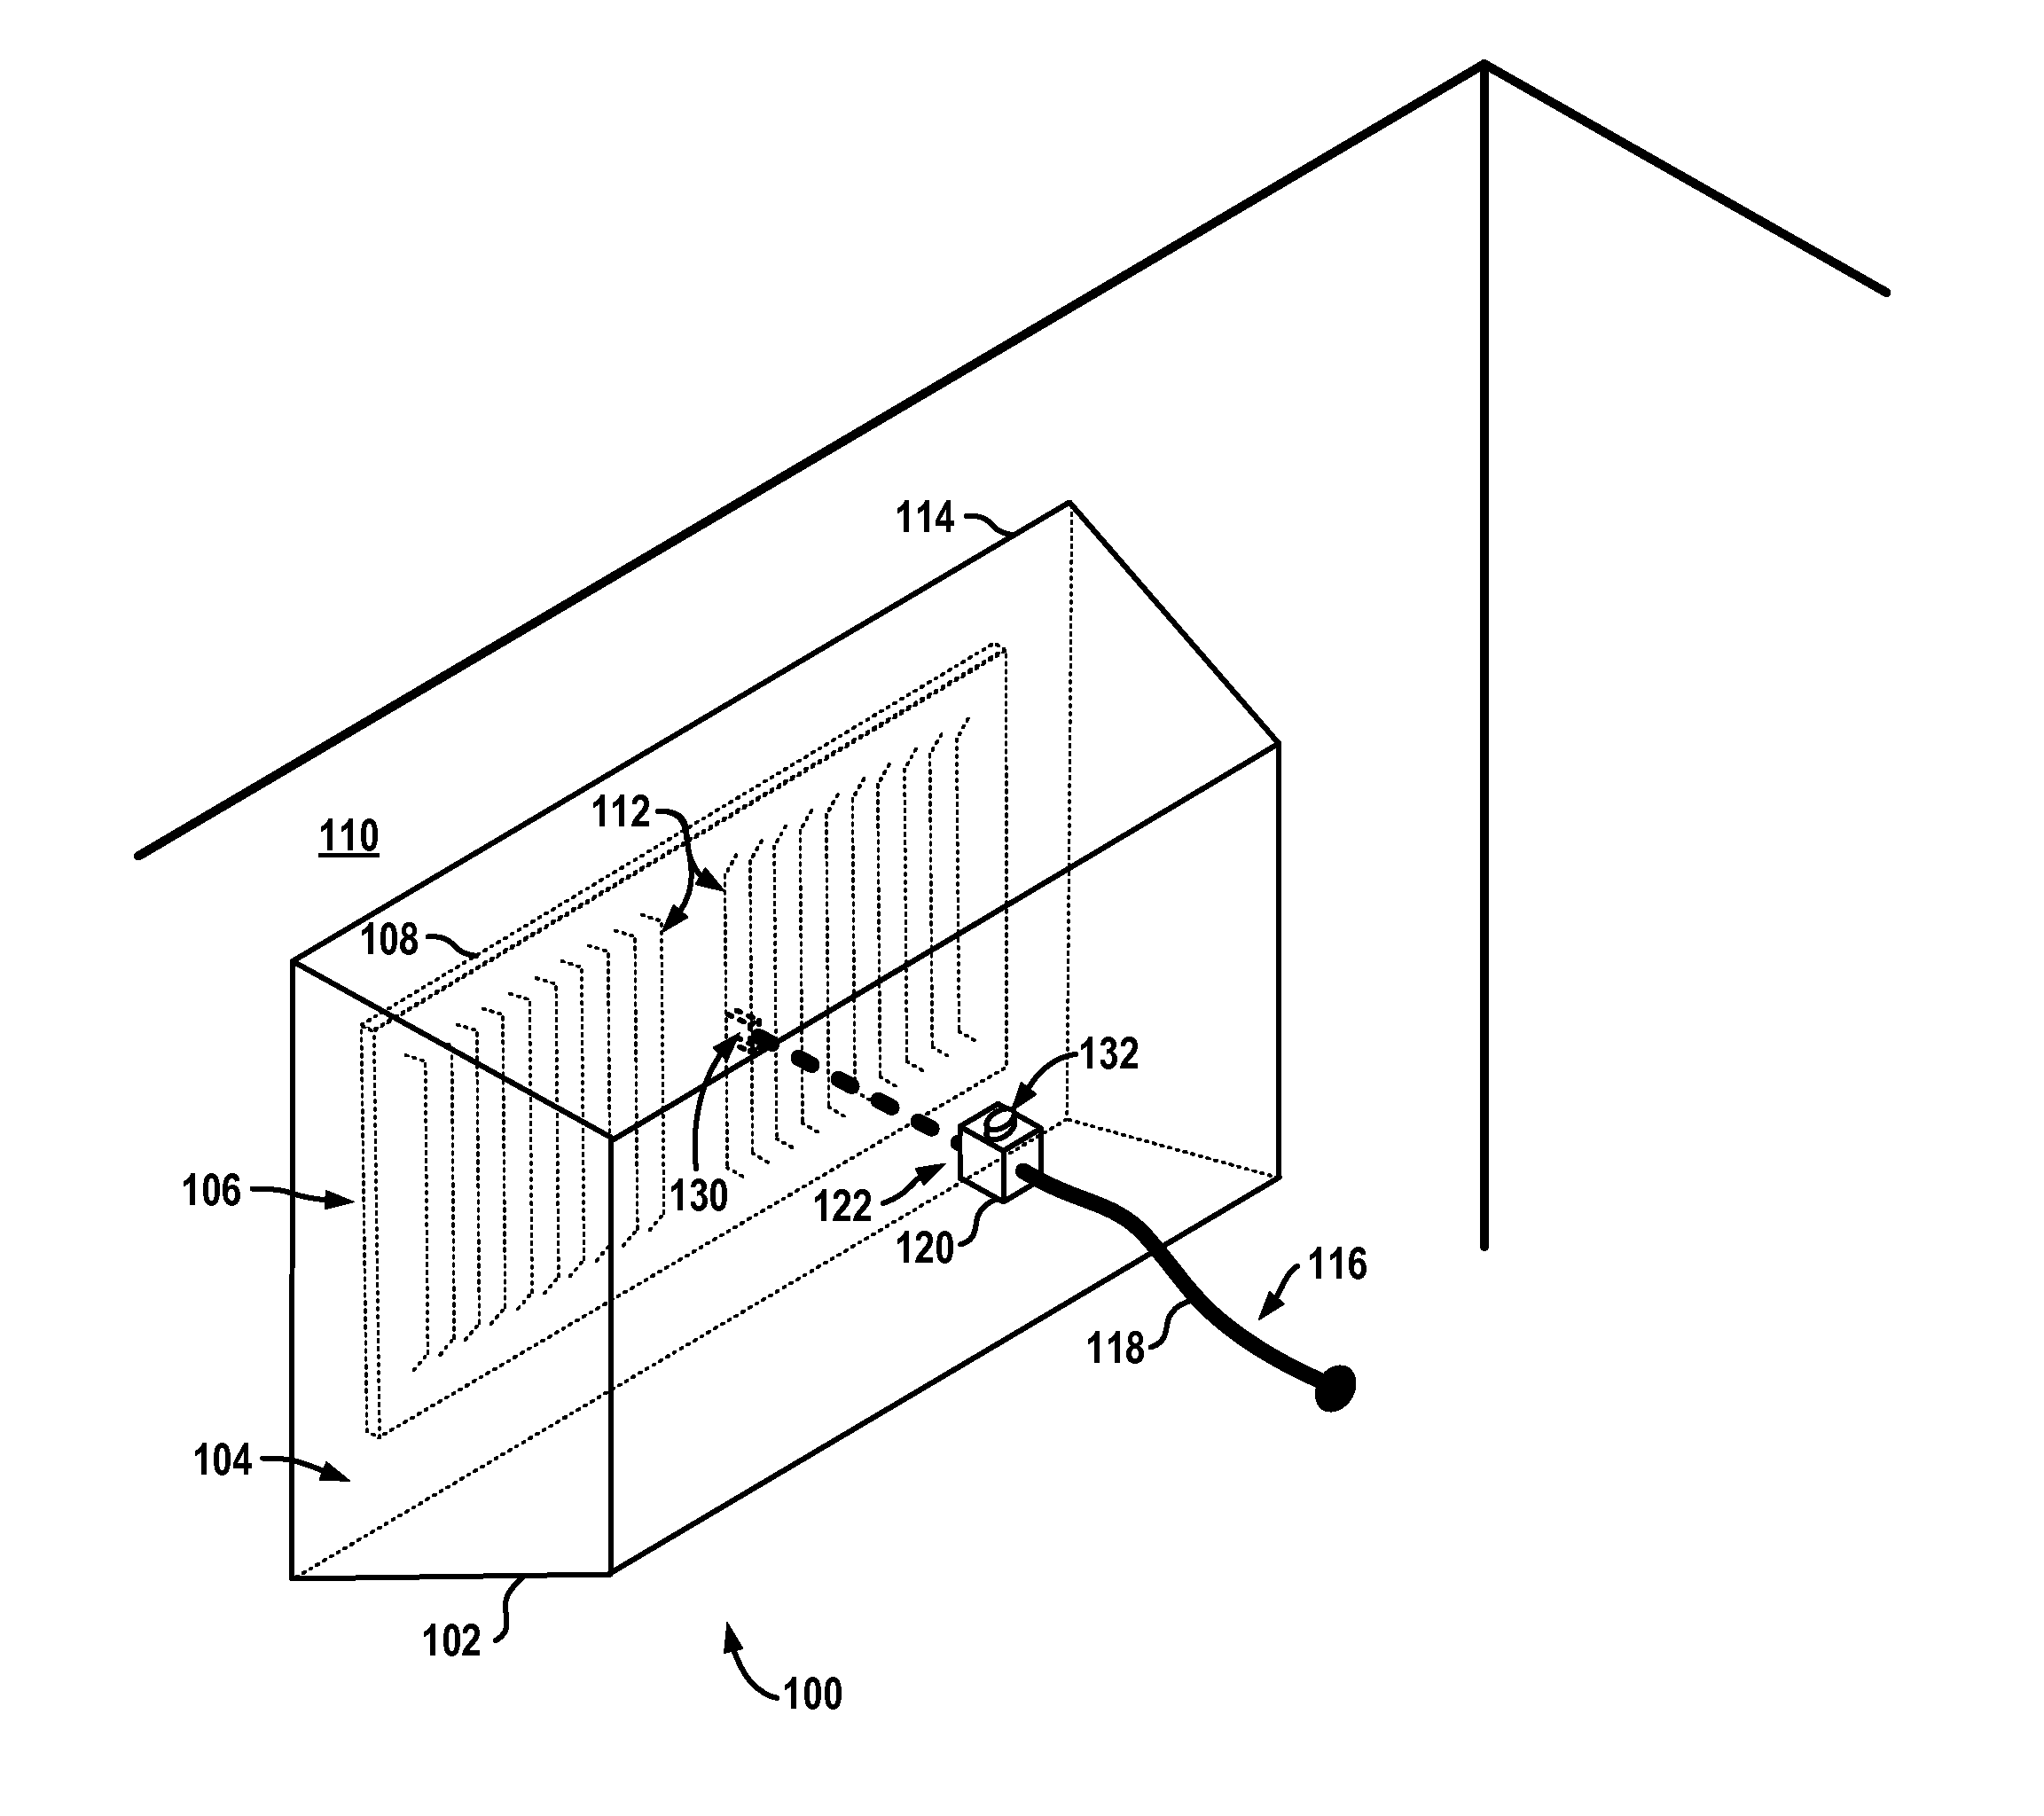 Air vent cover for use in testing air leakage of an air duct system